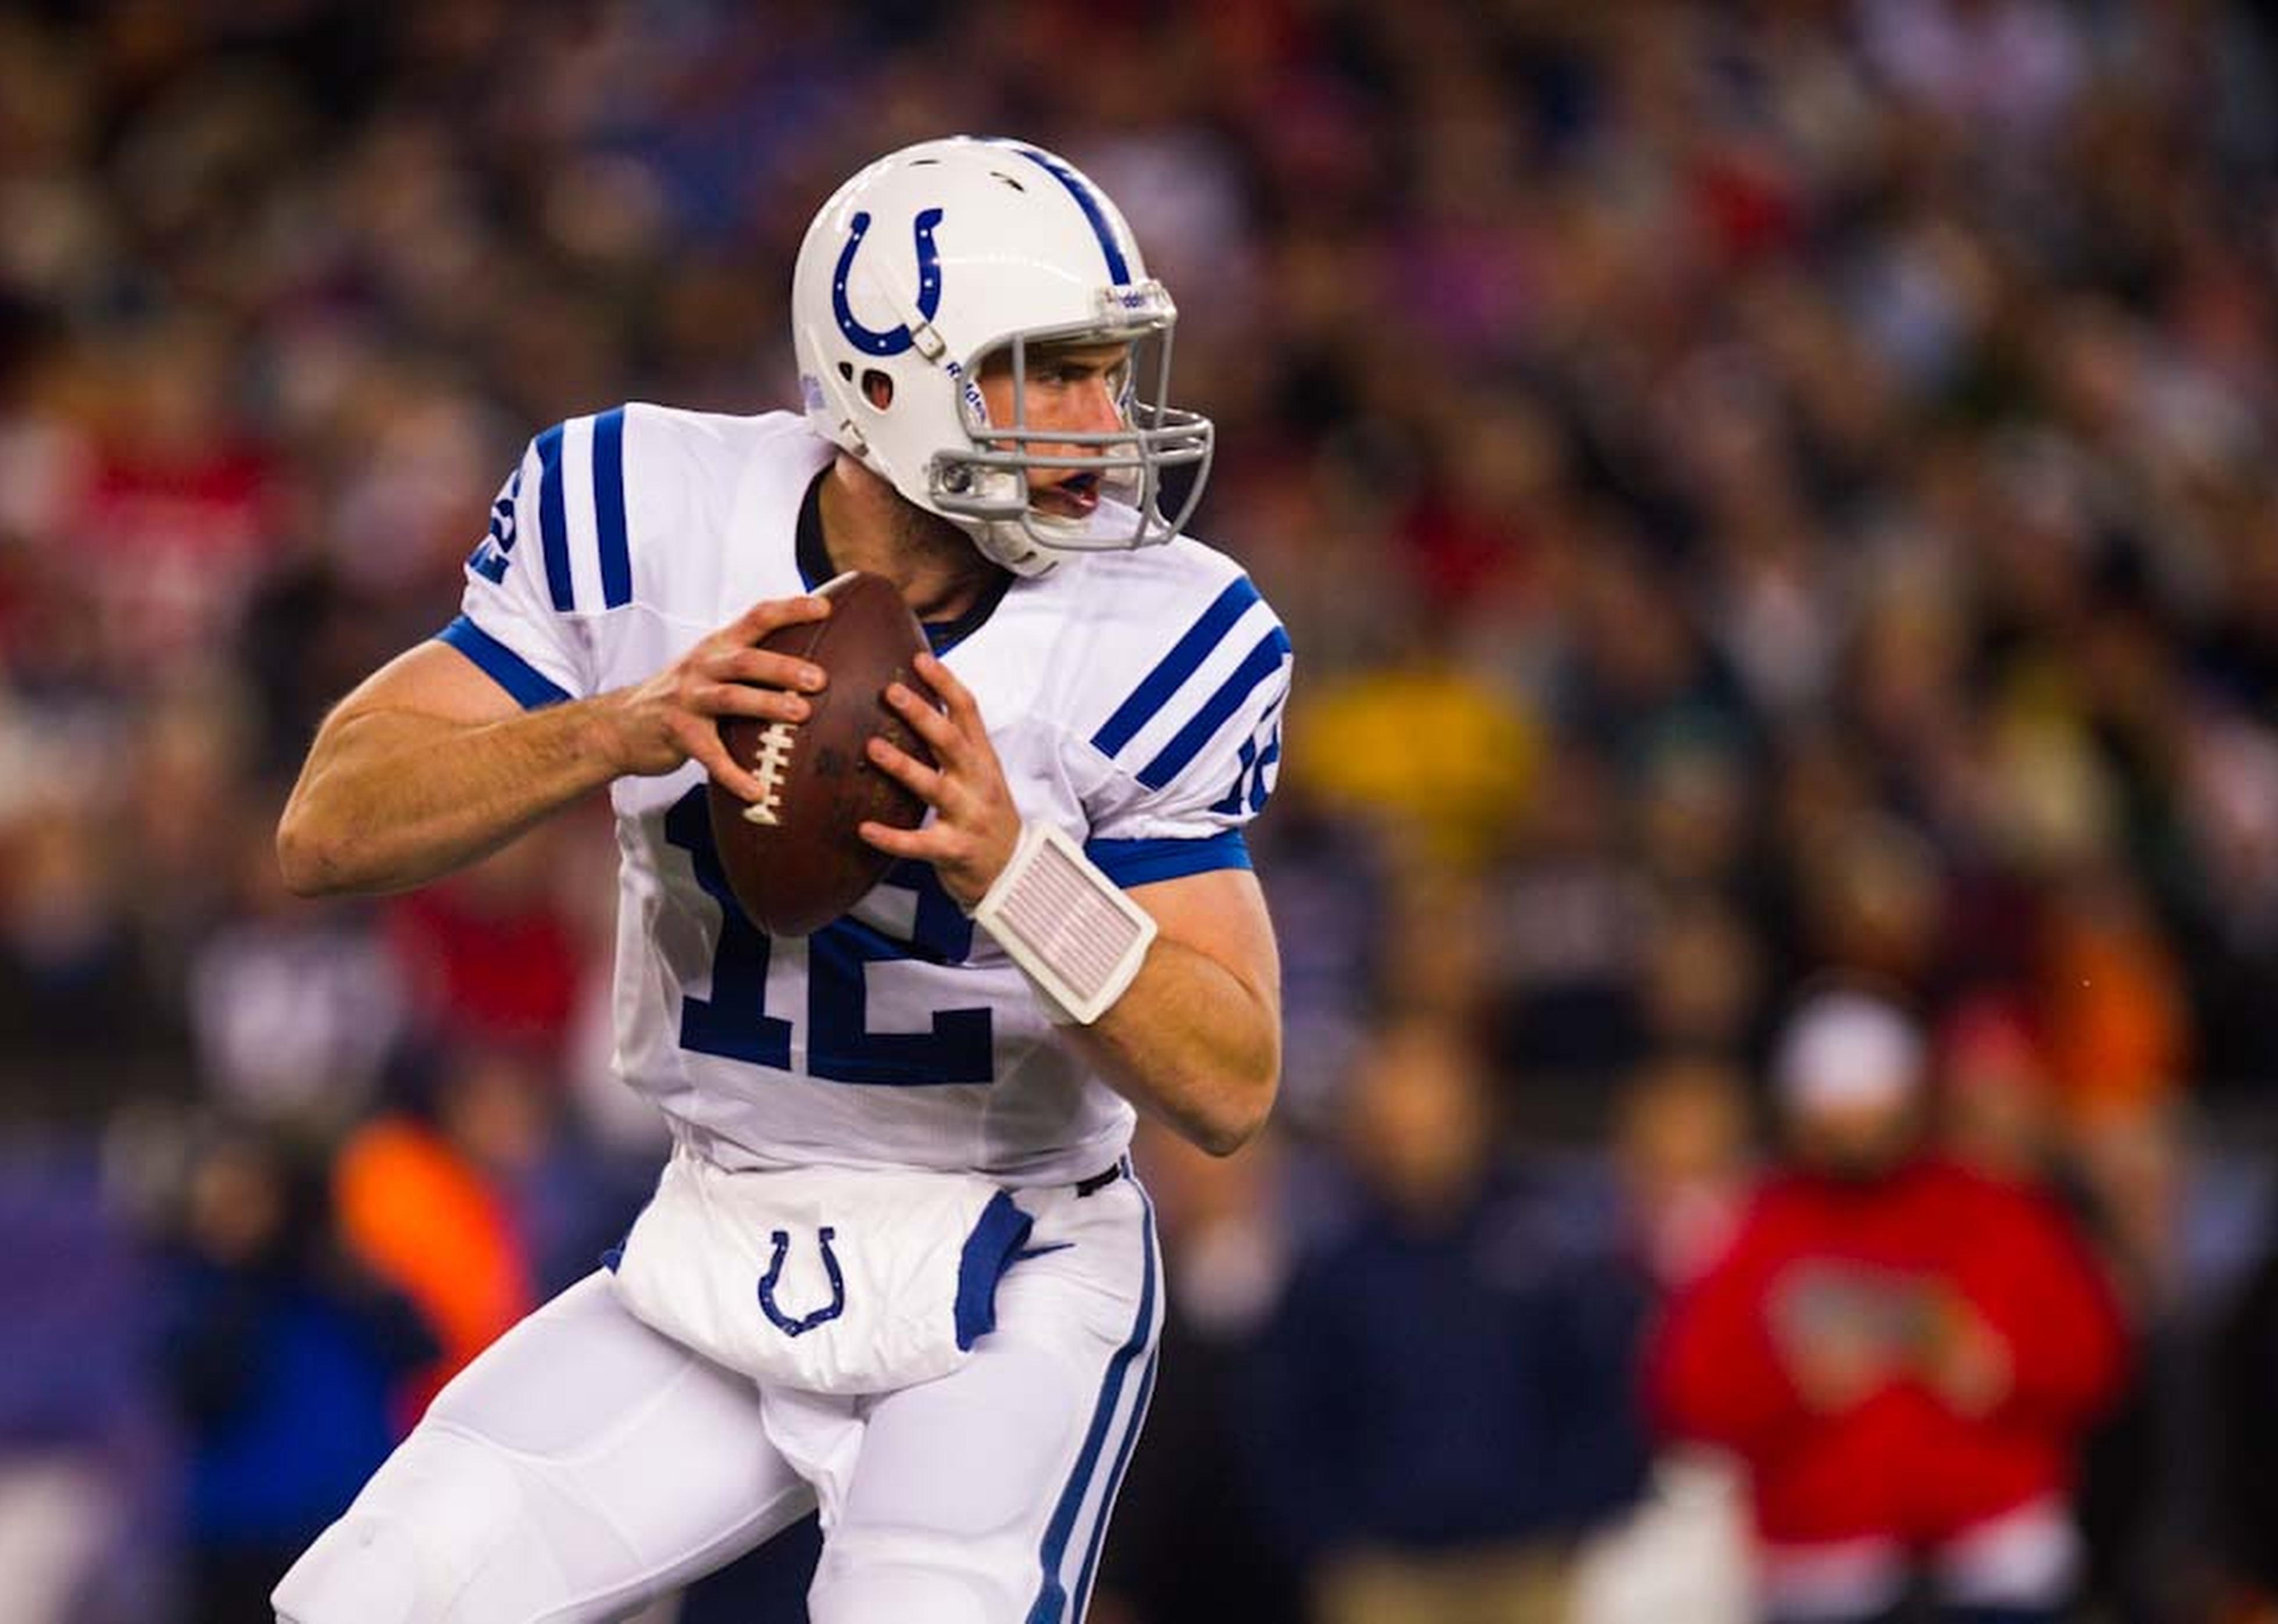 Andrew Luck of the Indianapolis Colts drops back to throw a pass during a game